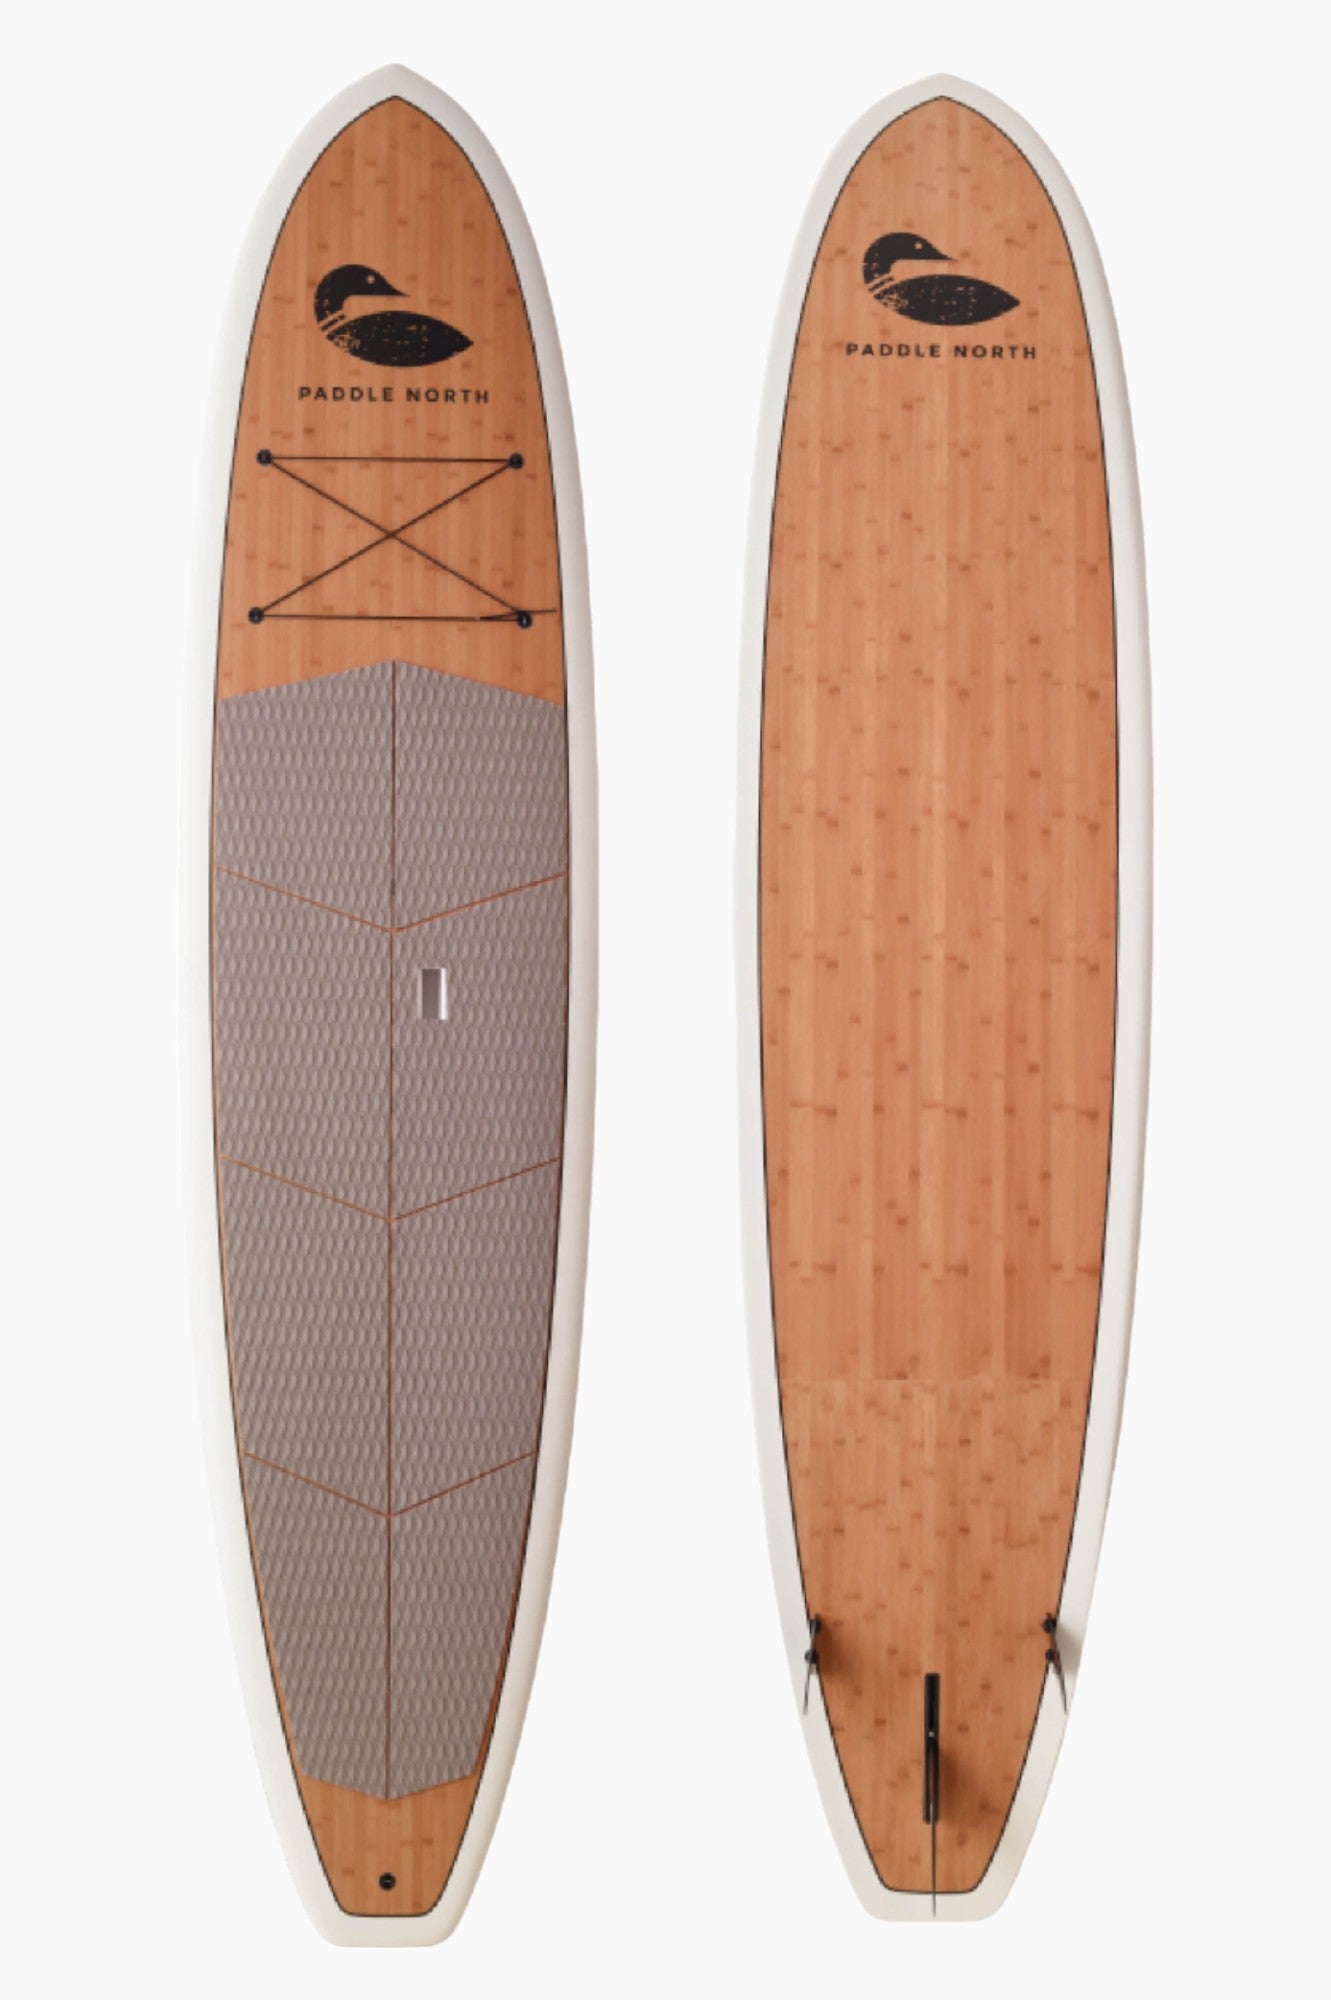 Photo of a top of a paddle board next to a photo of the bottom of a paddle board.